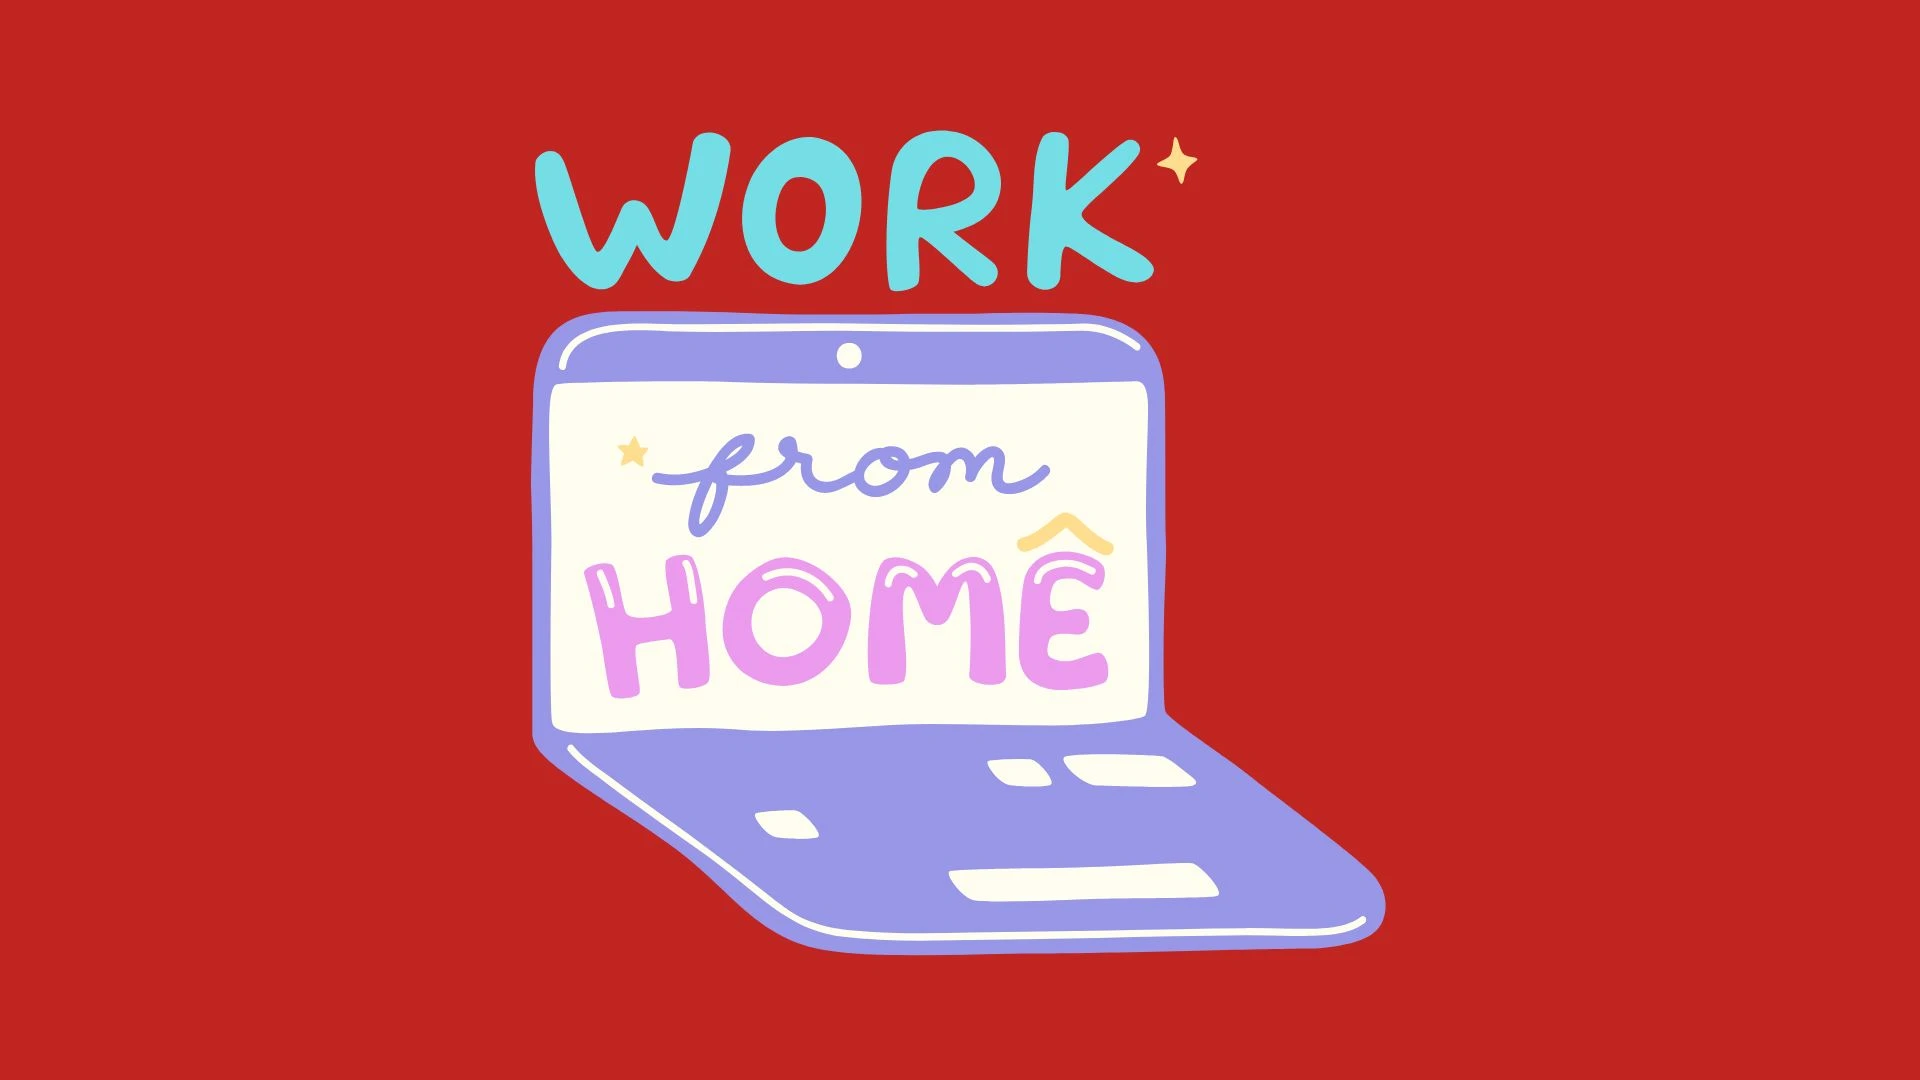 20 Vastu Ways to Maximize Success When Working From Home (WFH)